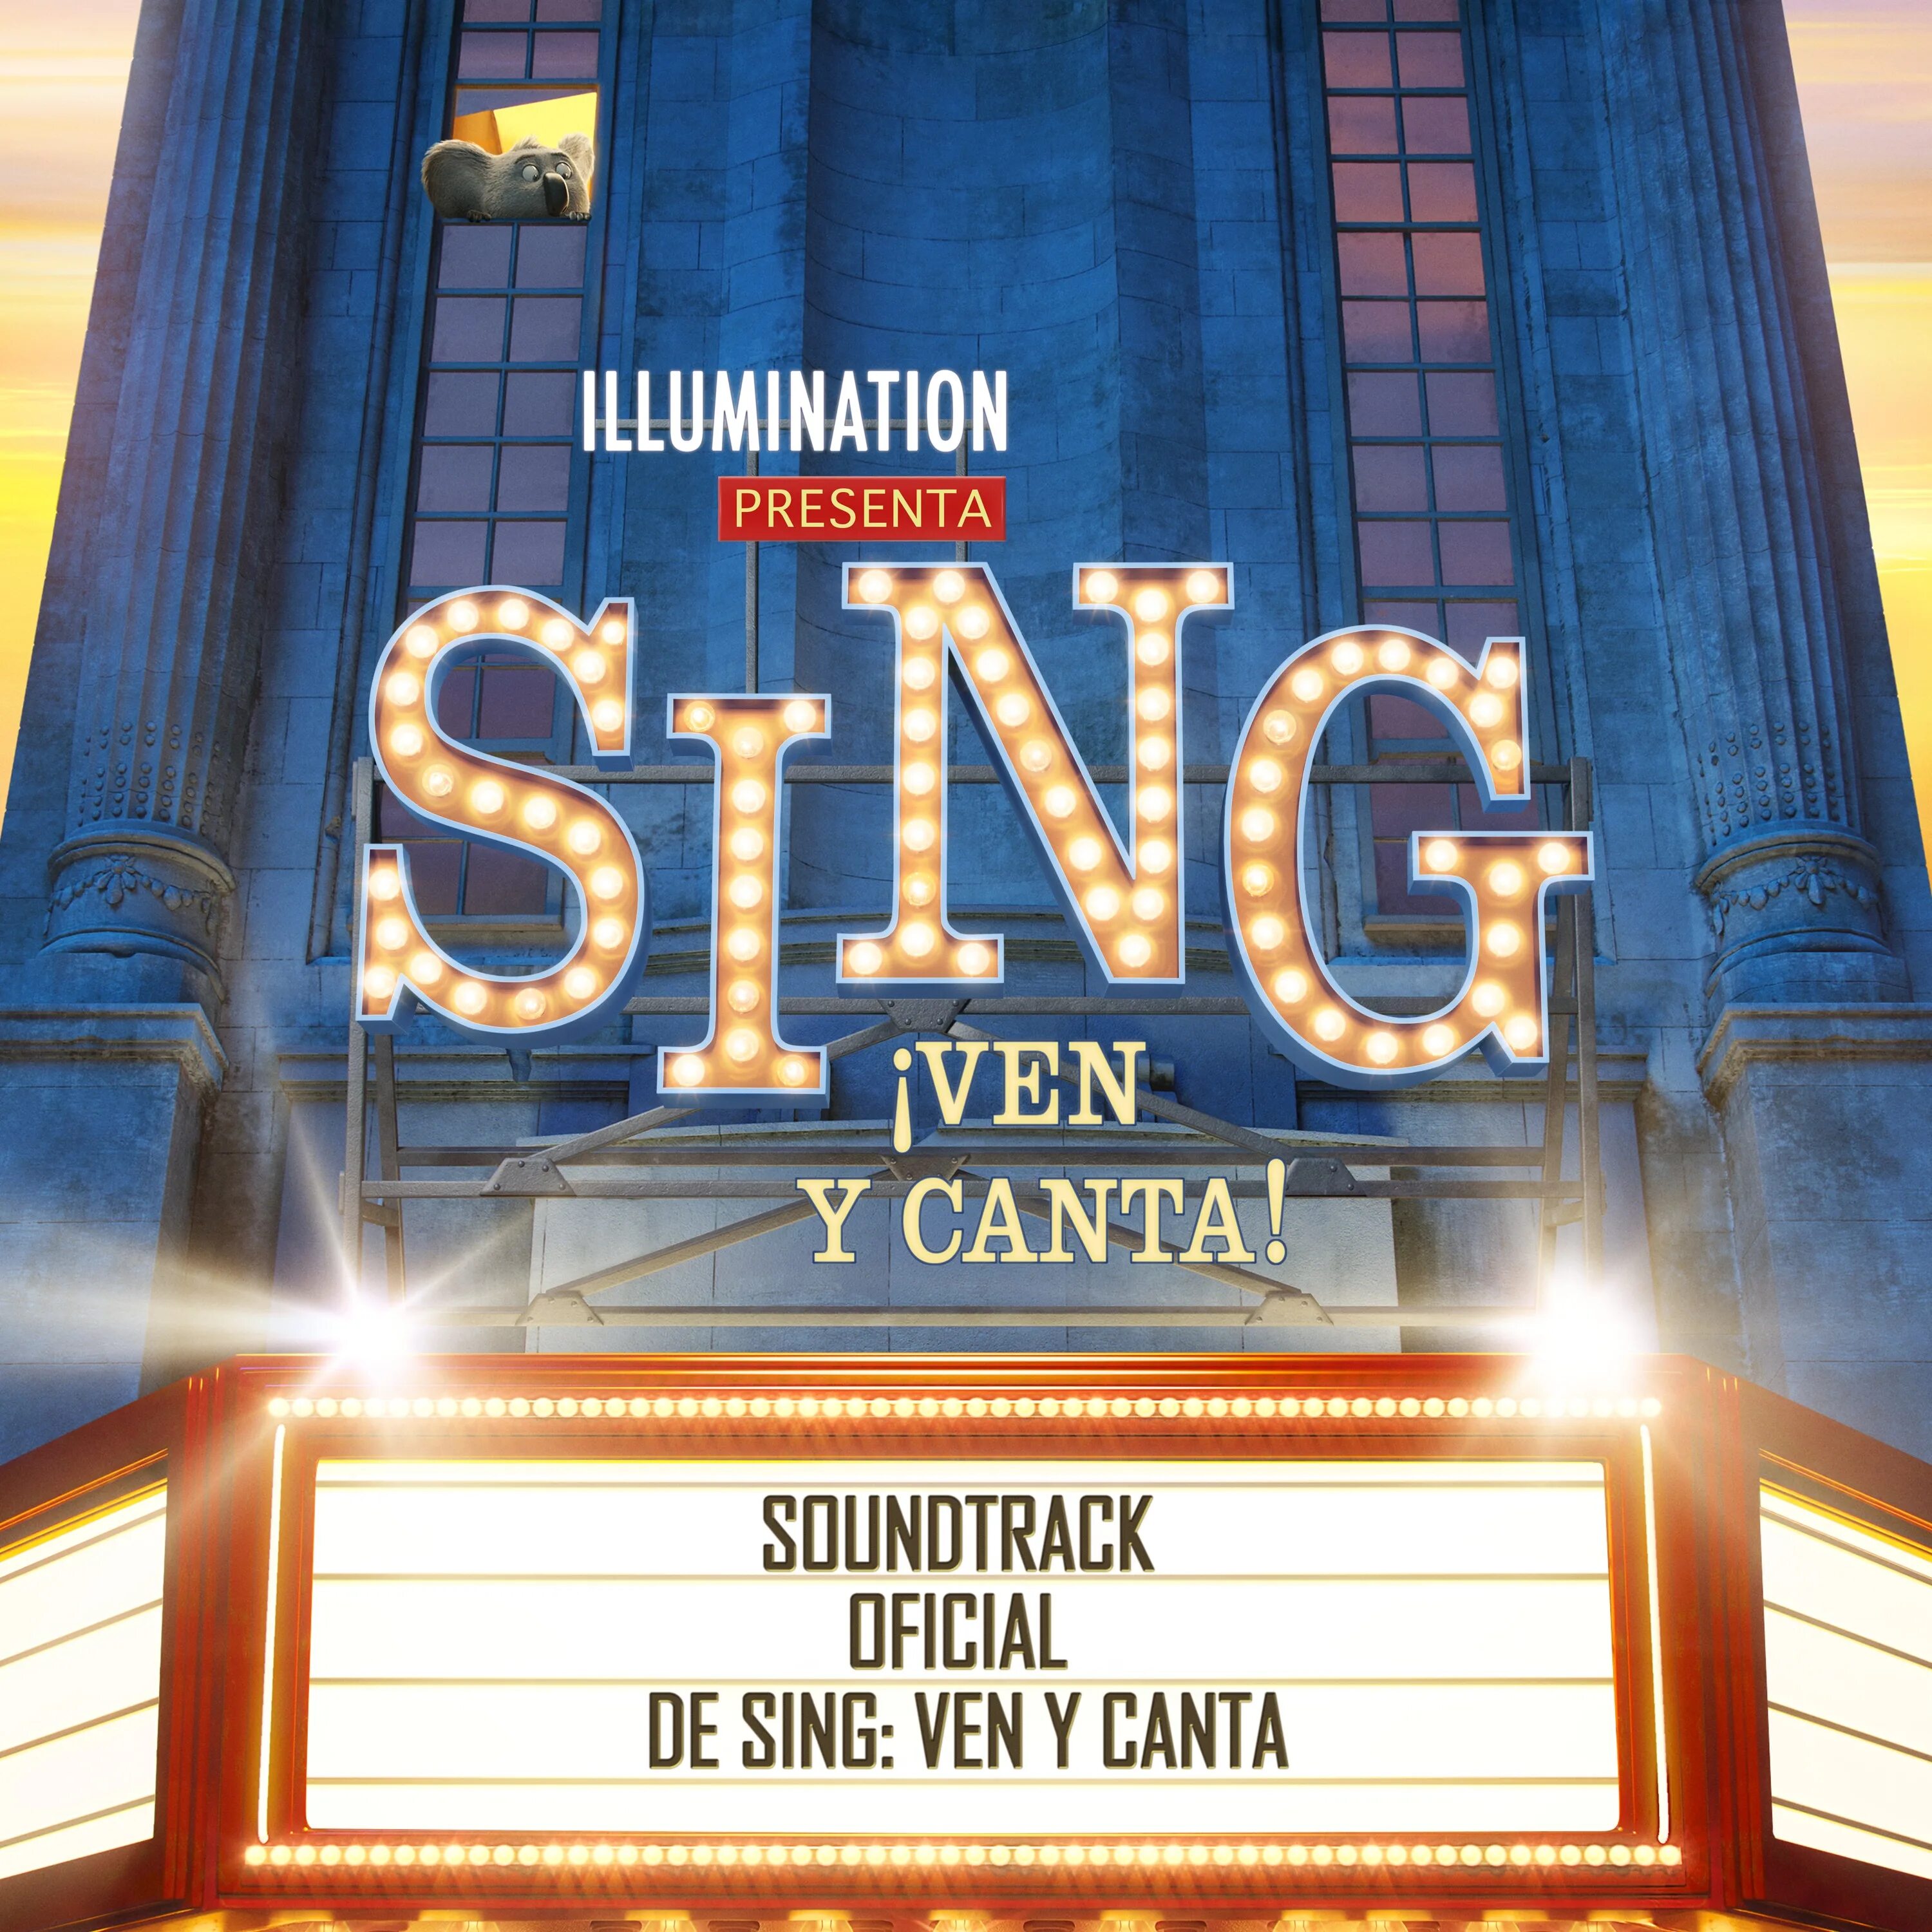 Sing 2 Soundtrack. OST Sing album. Картинки афиши Sing Soundtrack. Sing Motion picture. Sing soundtrack